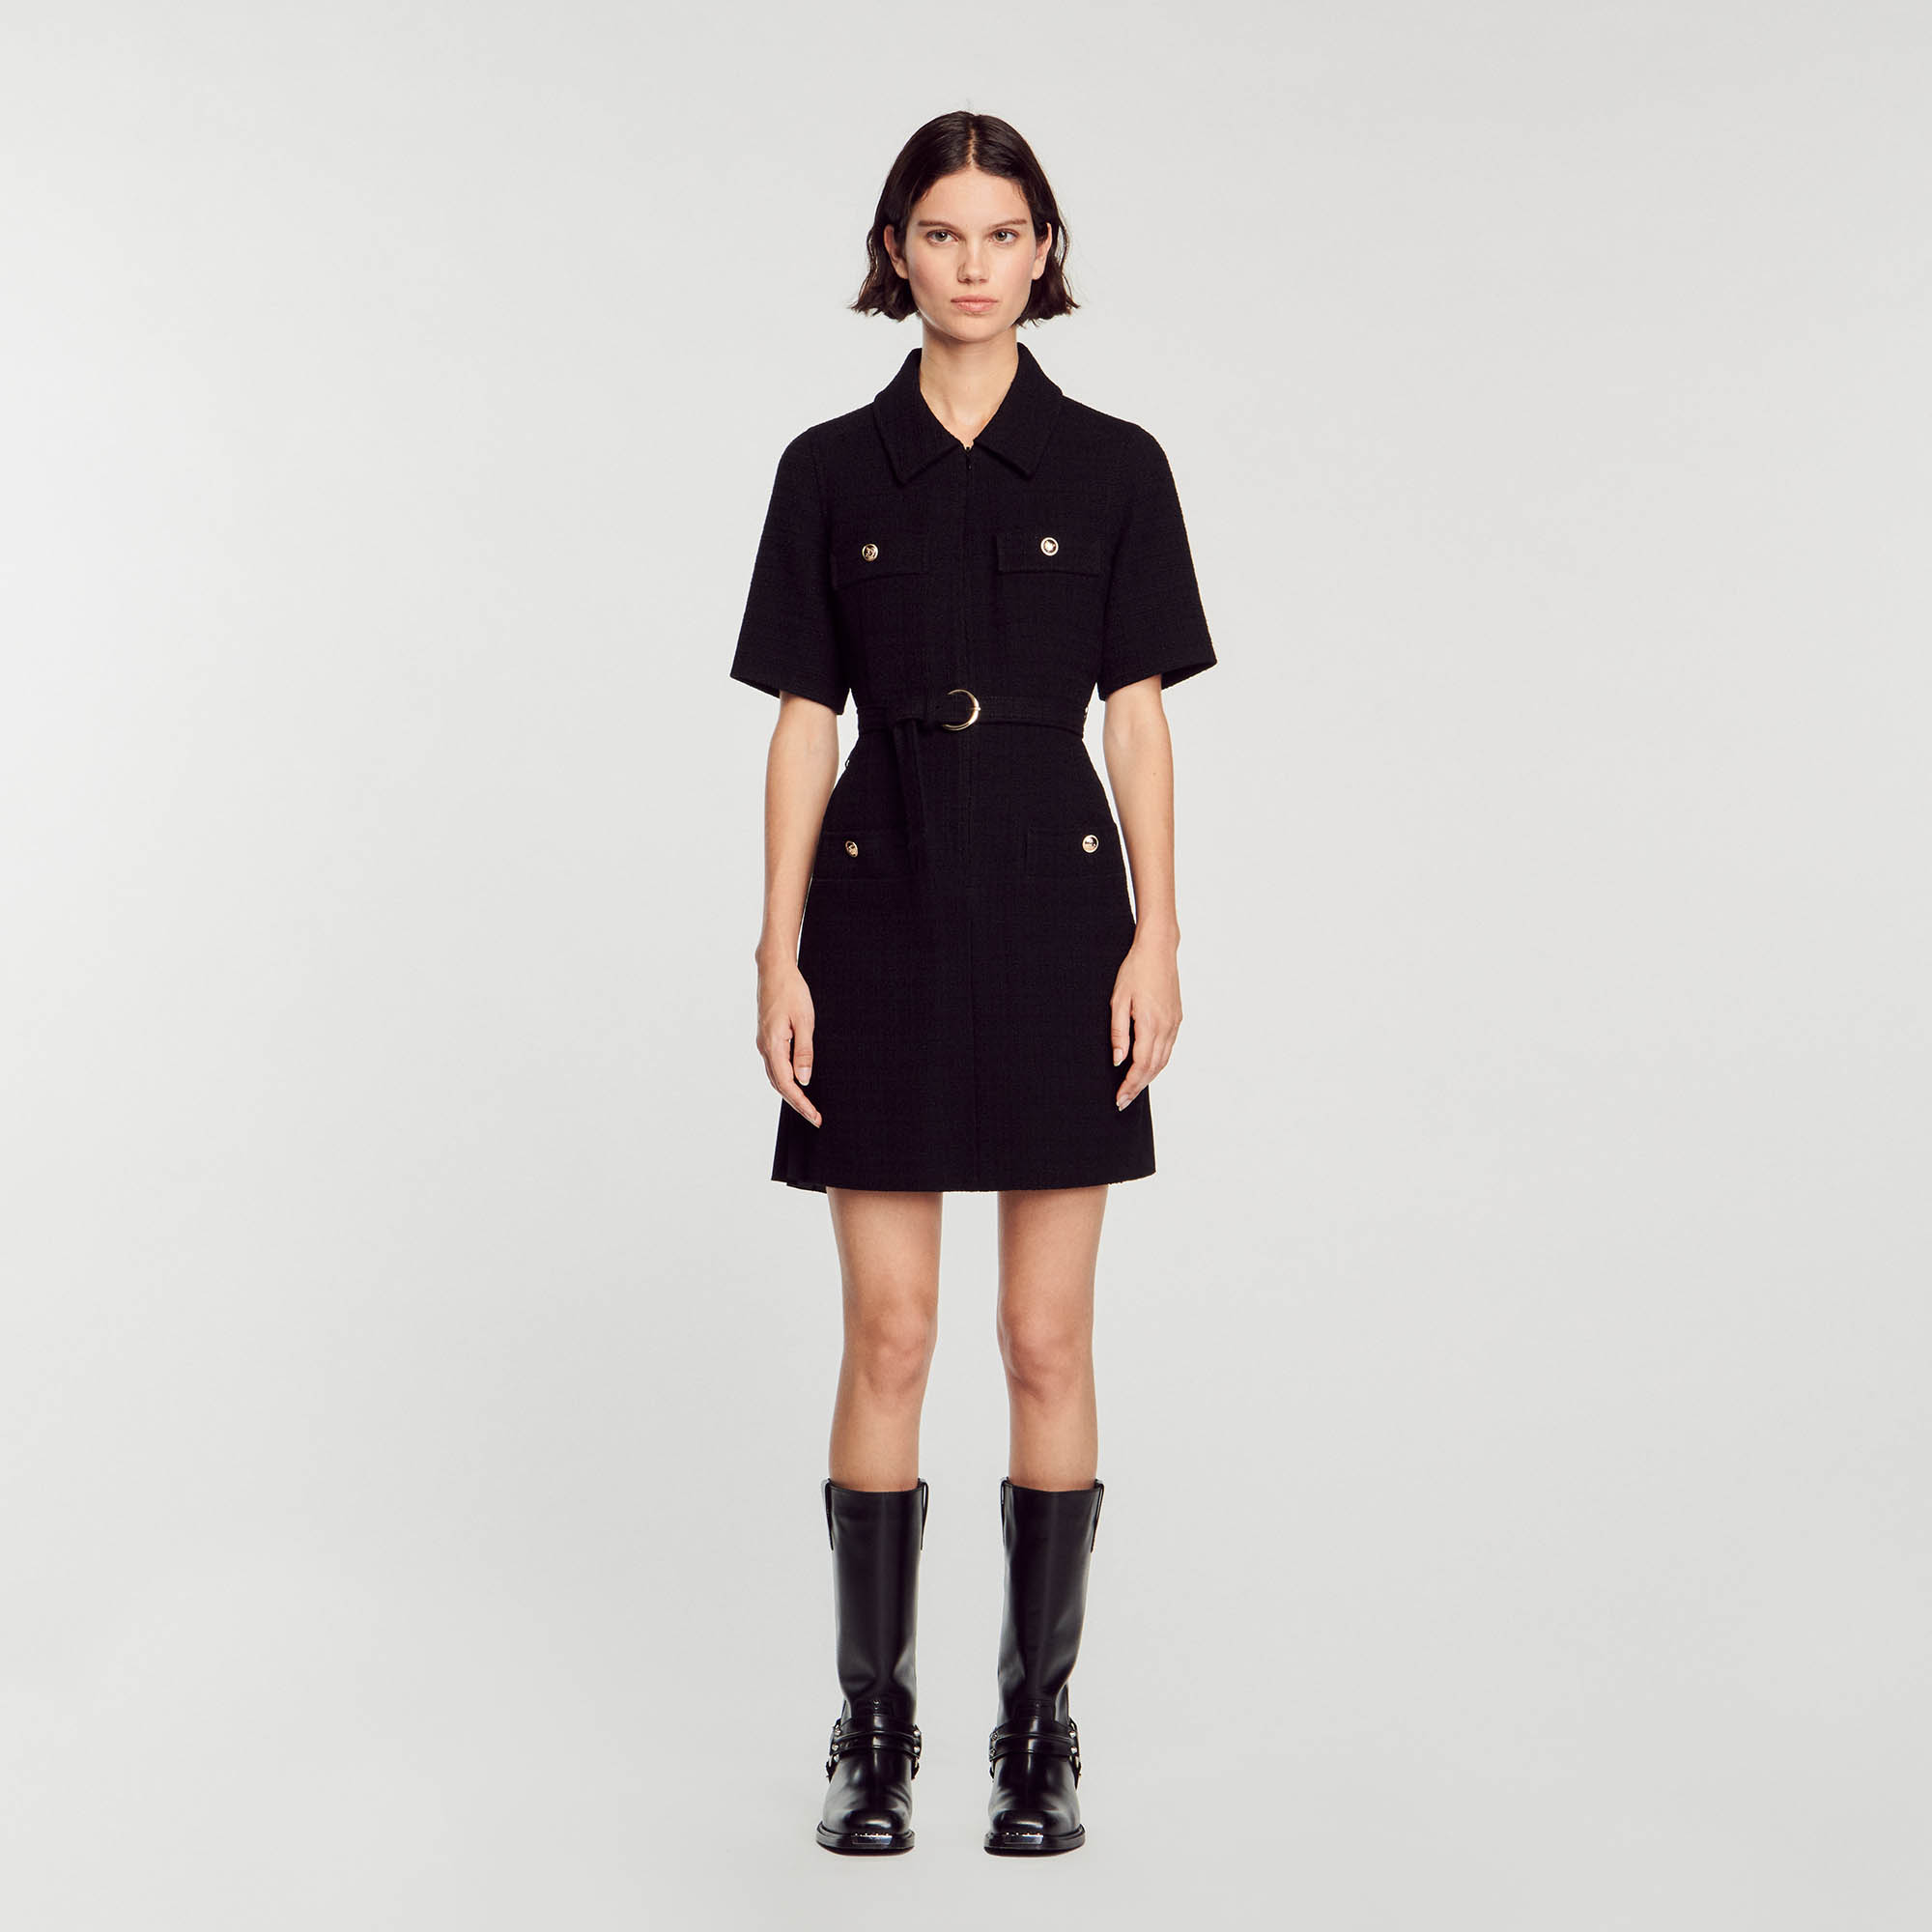 Sandro cotton Short tweed dress with a shirt collar, a button fastening, short sleeves and sunray pleats on the back